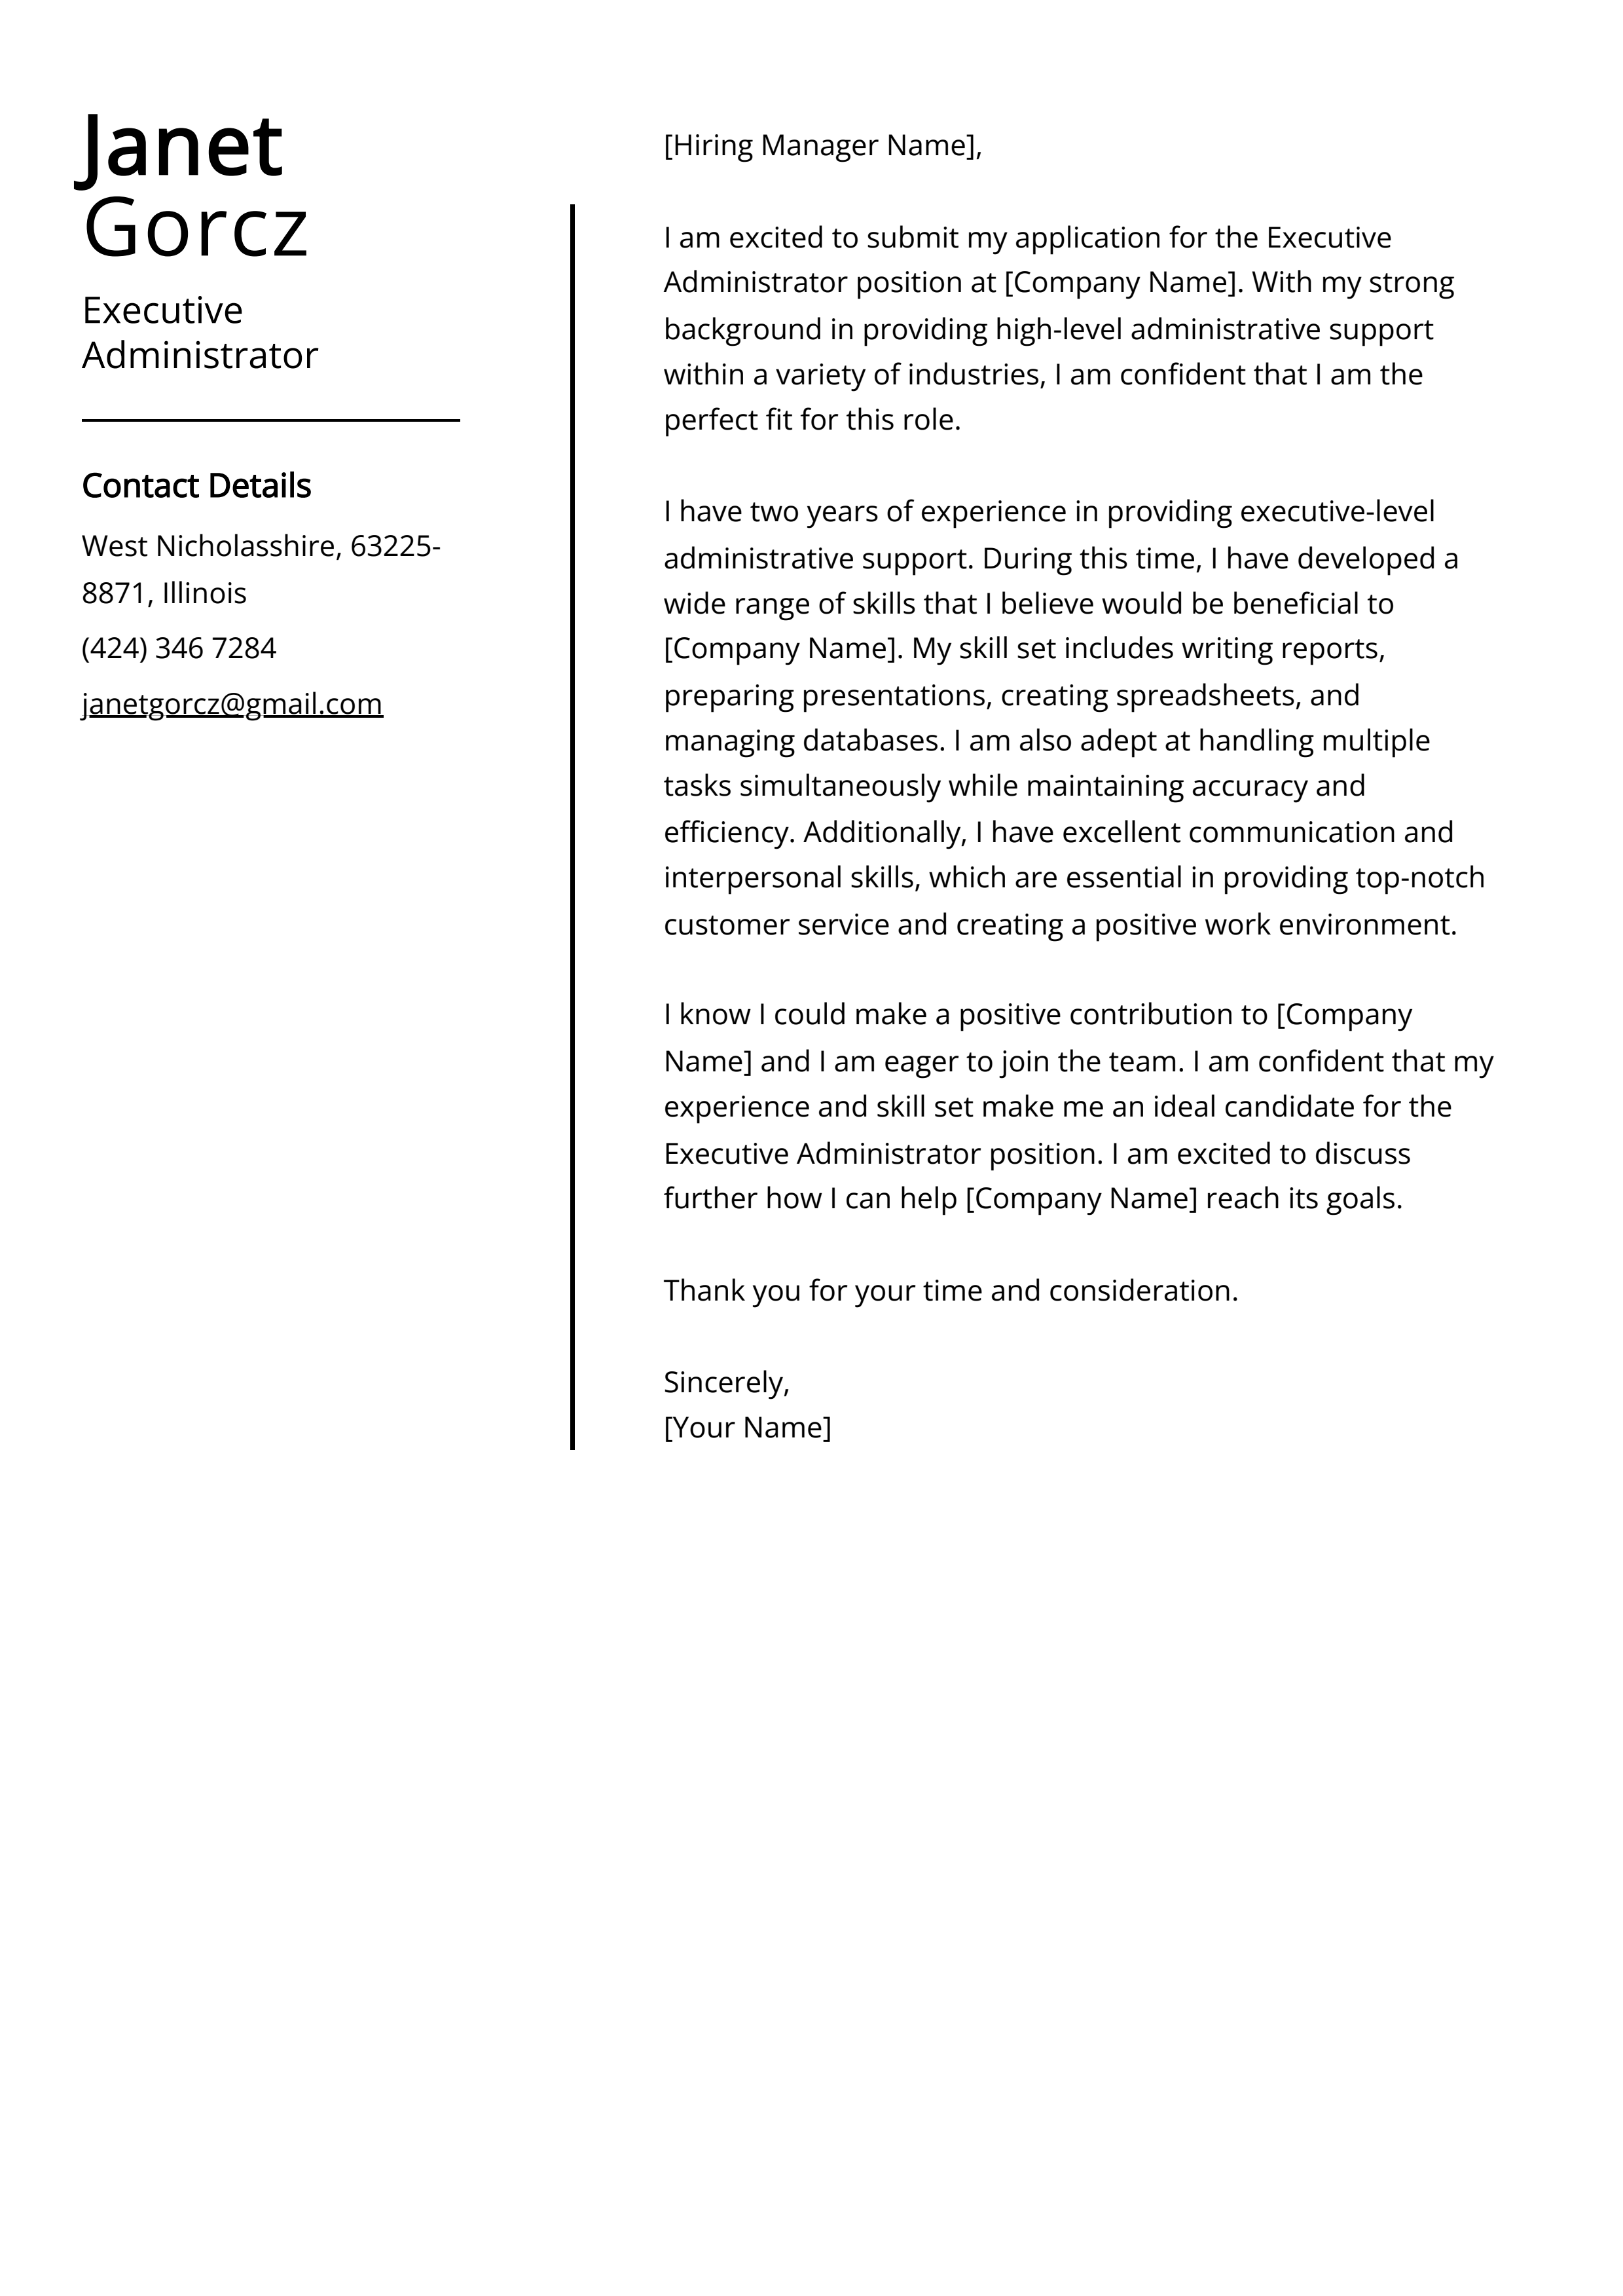 Executive Administrator Cover Letter Example